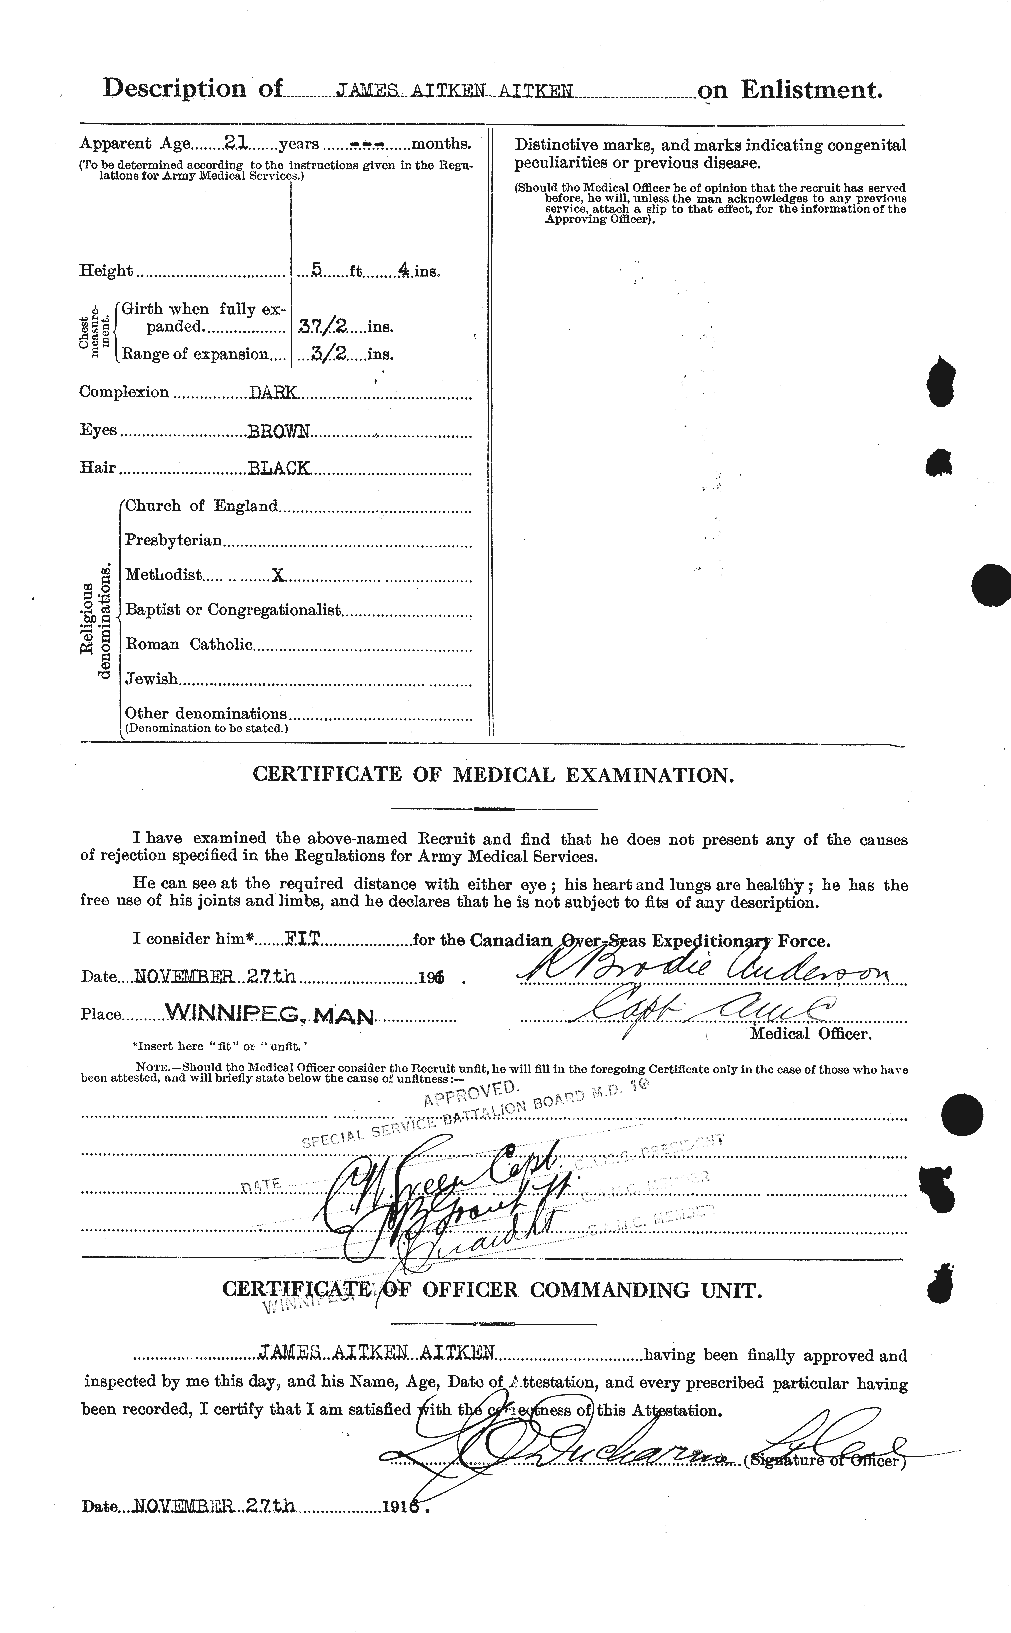 Personnel Records of the First World War - CEF 203389b